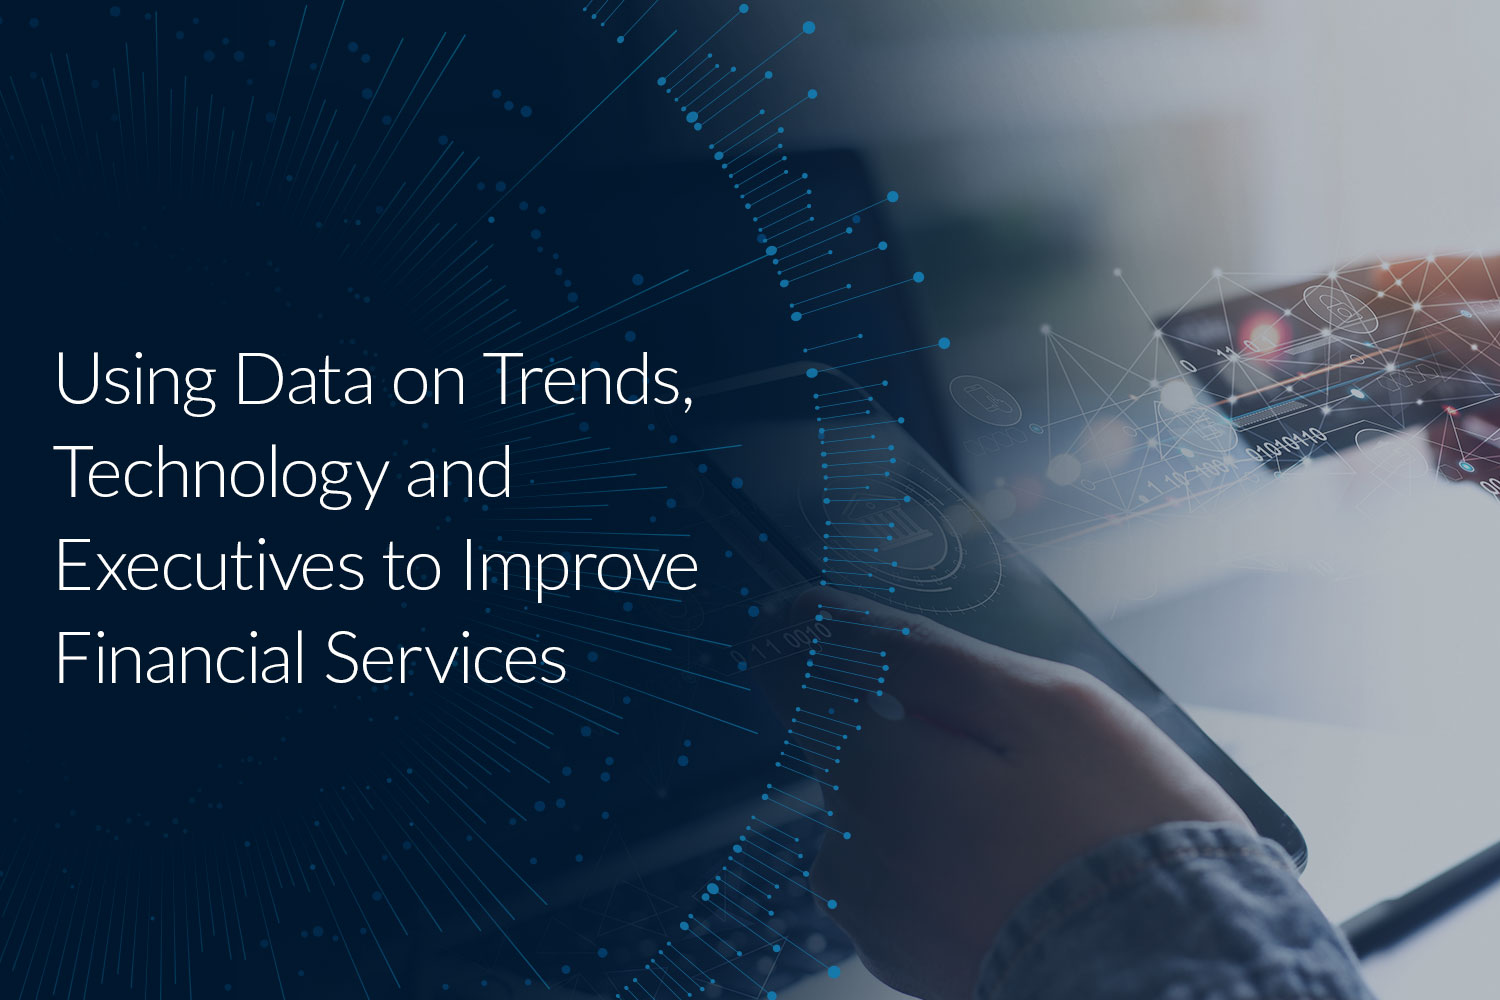 Using Data on Trends, Technology and Executives To Improve Financial Services